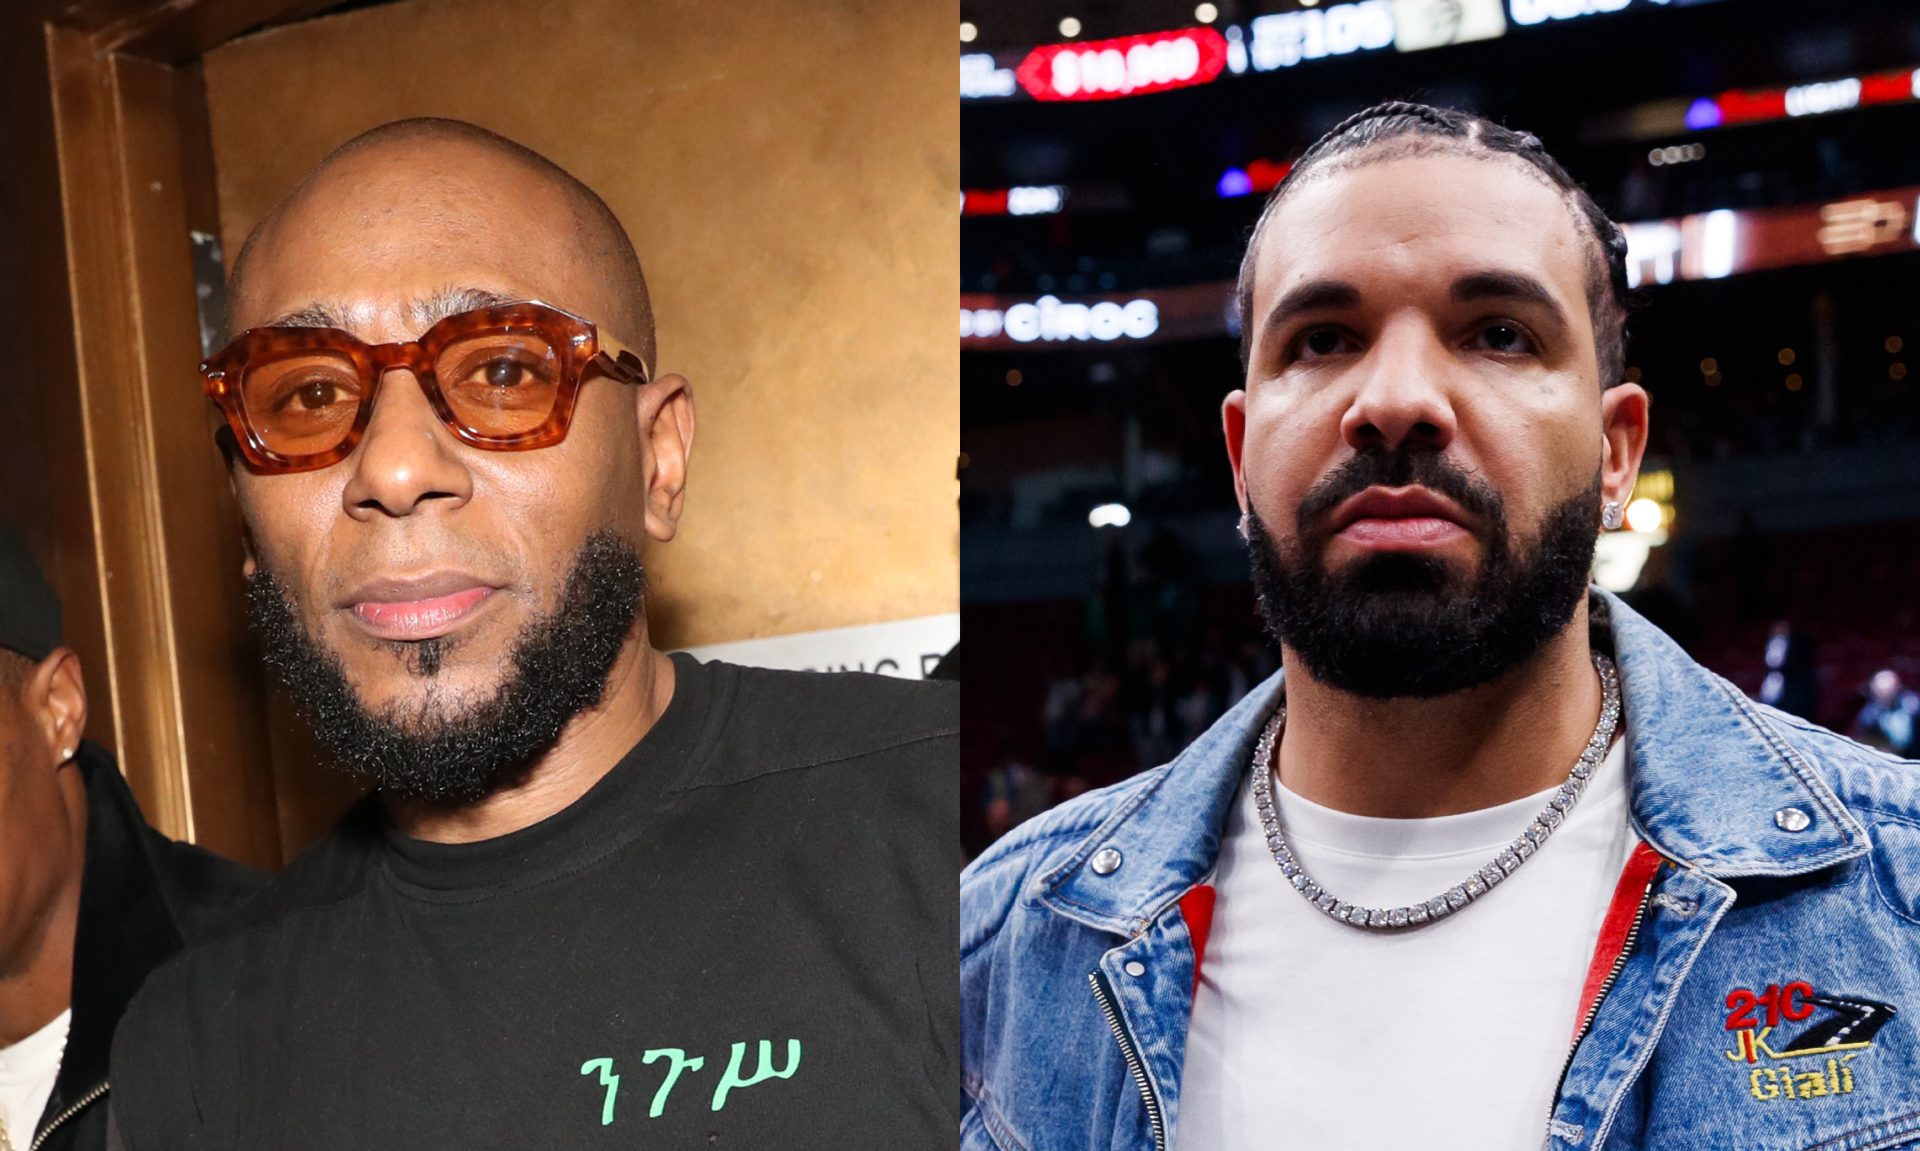 Oop! Mos Def Says Drake Is A Pop Artist With "Shopping" Music